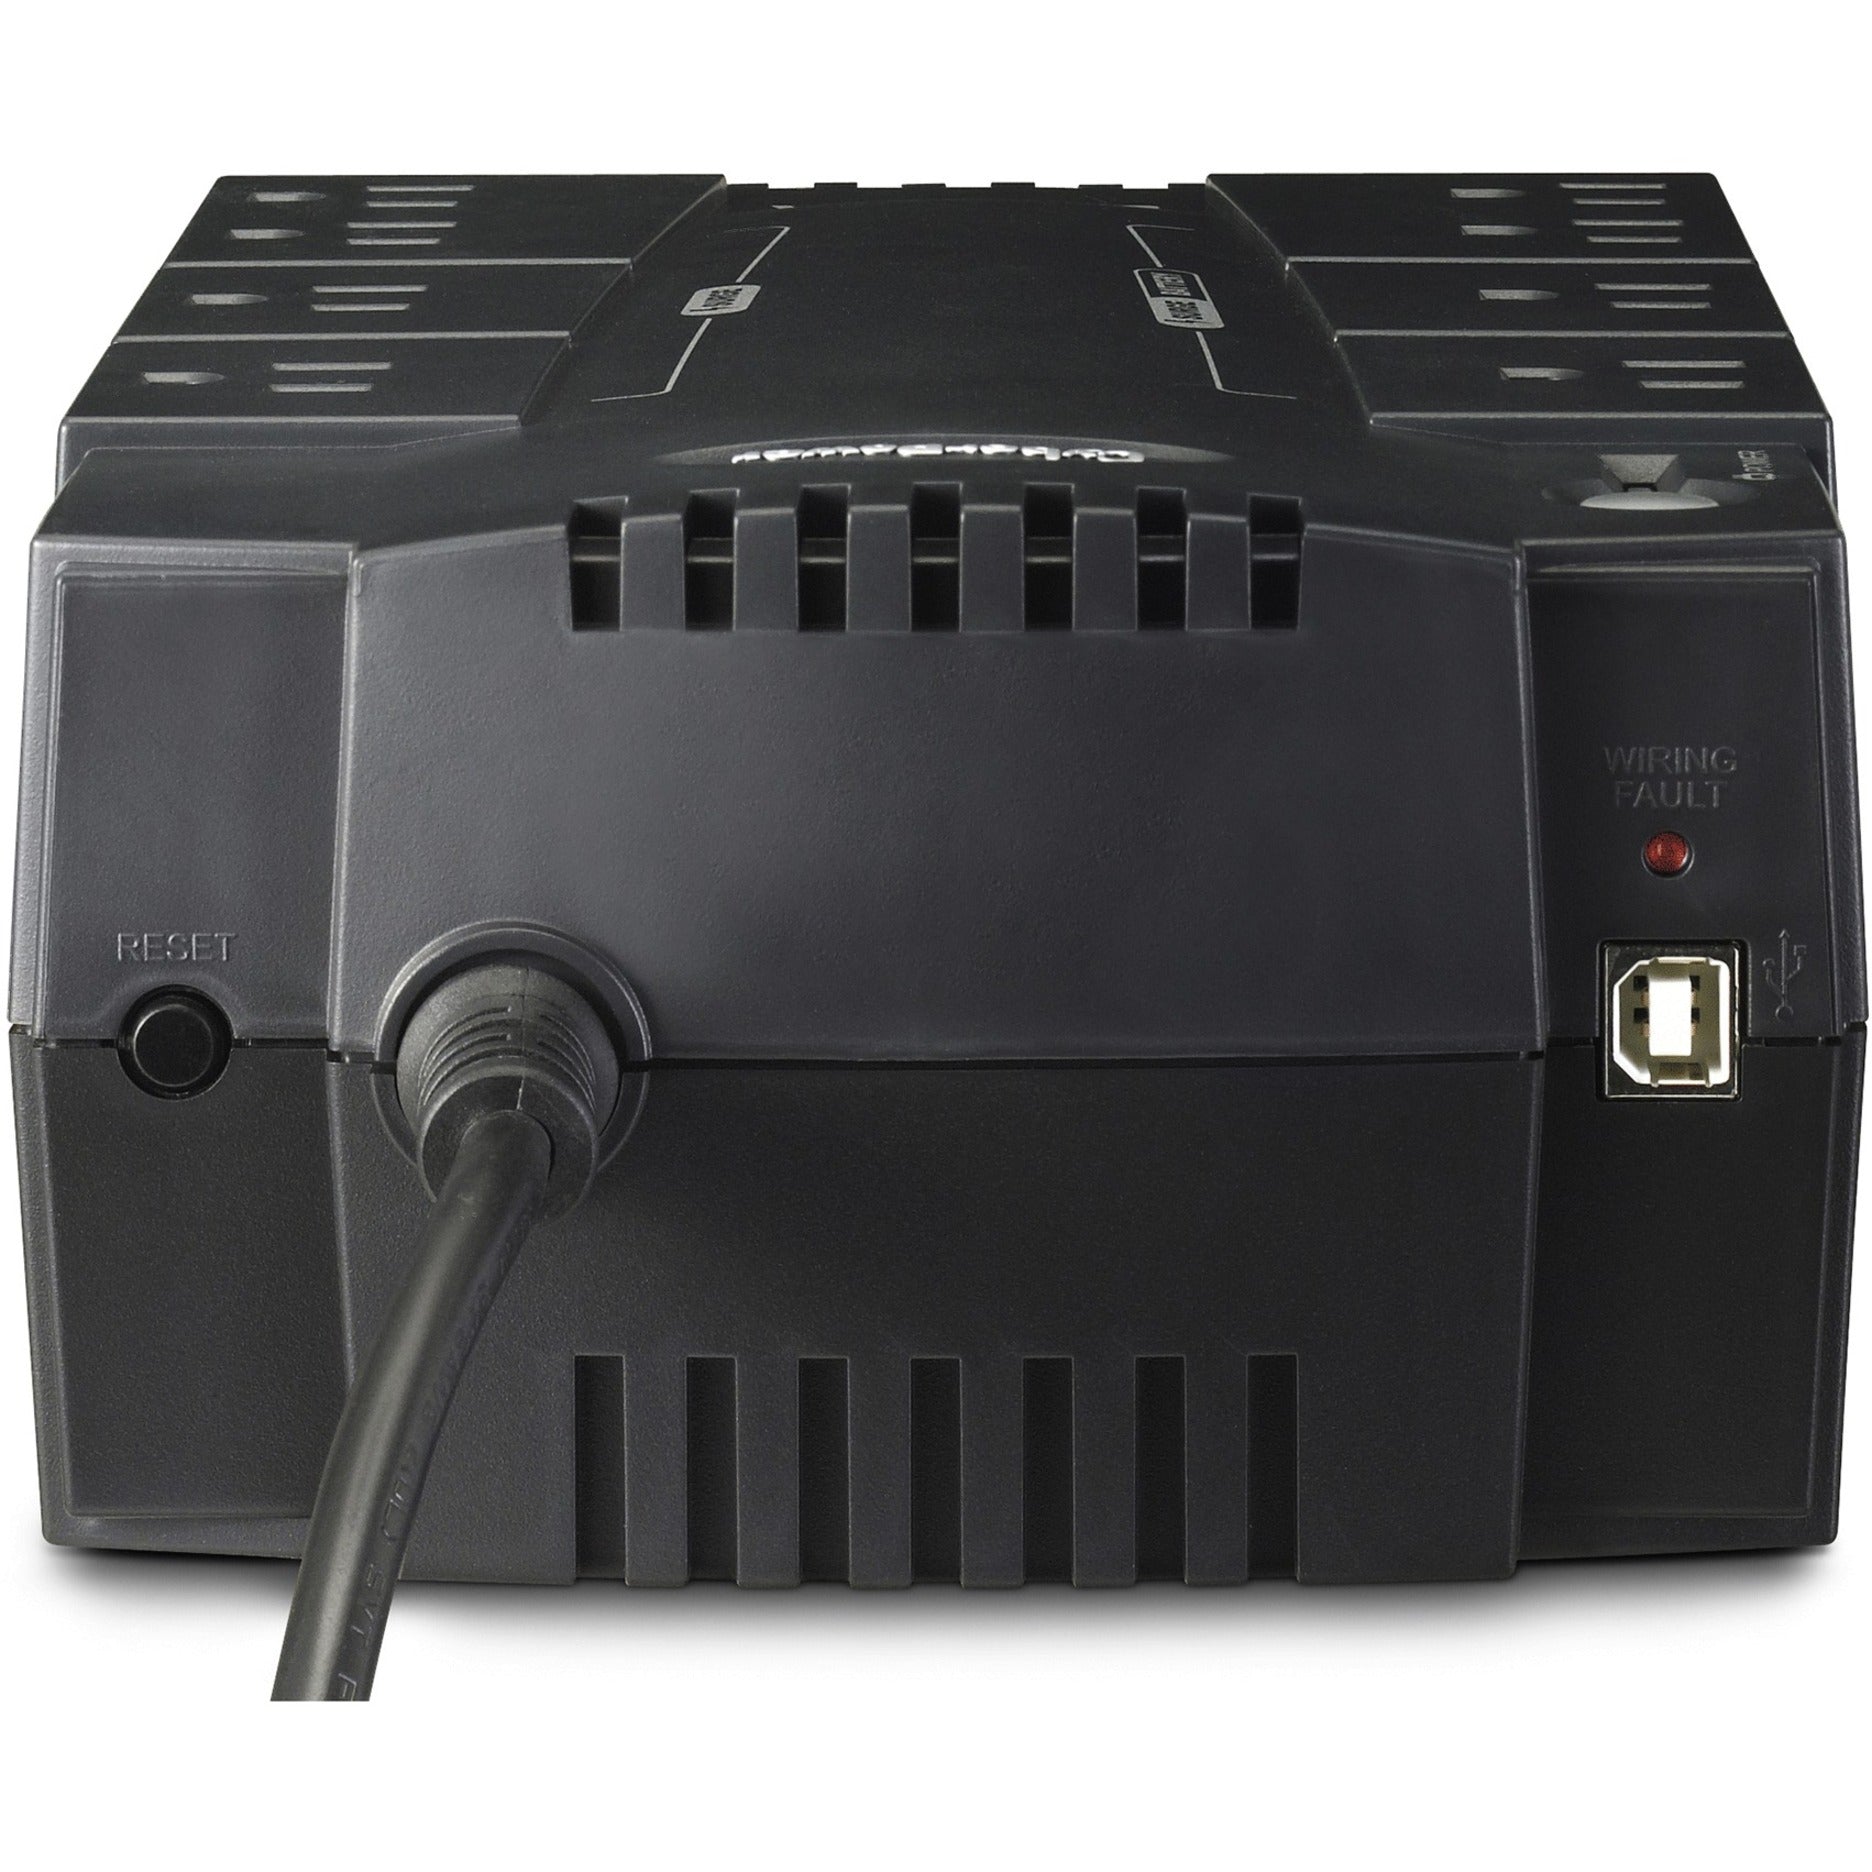 CyberPower CP550SLG Standby UPS, 550 VA Desktop Power Backup, 2 Minute Full Load Backup, Energy Efficient